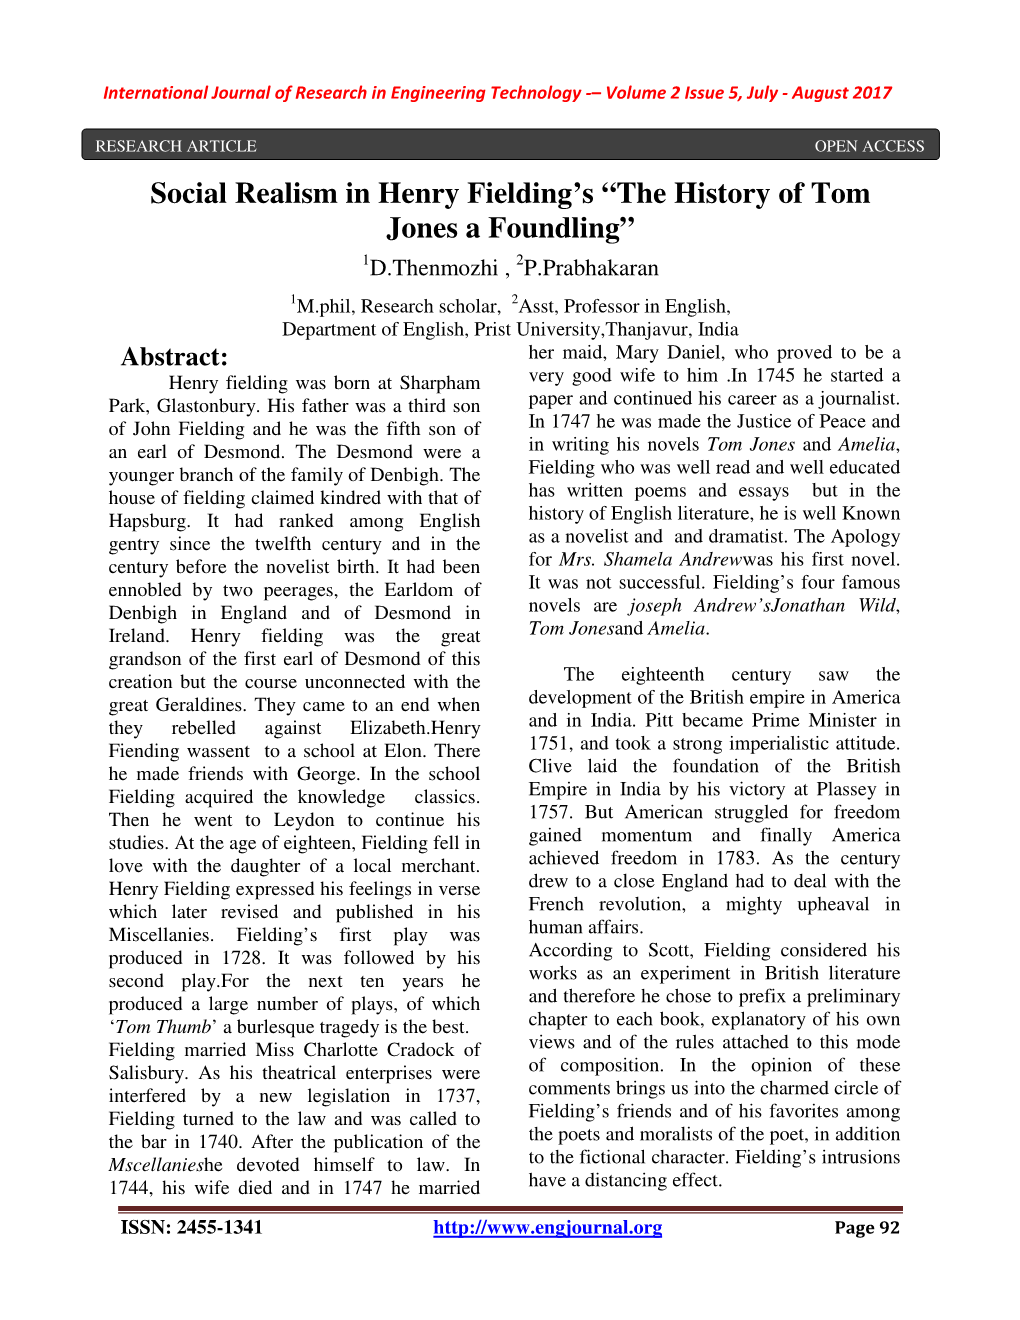 Social Realism in Henry Fielding's “The History of Tom Jones a Foundling”